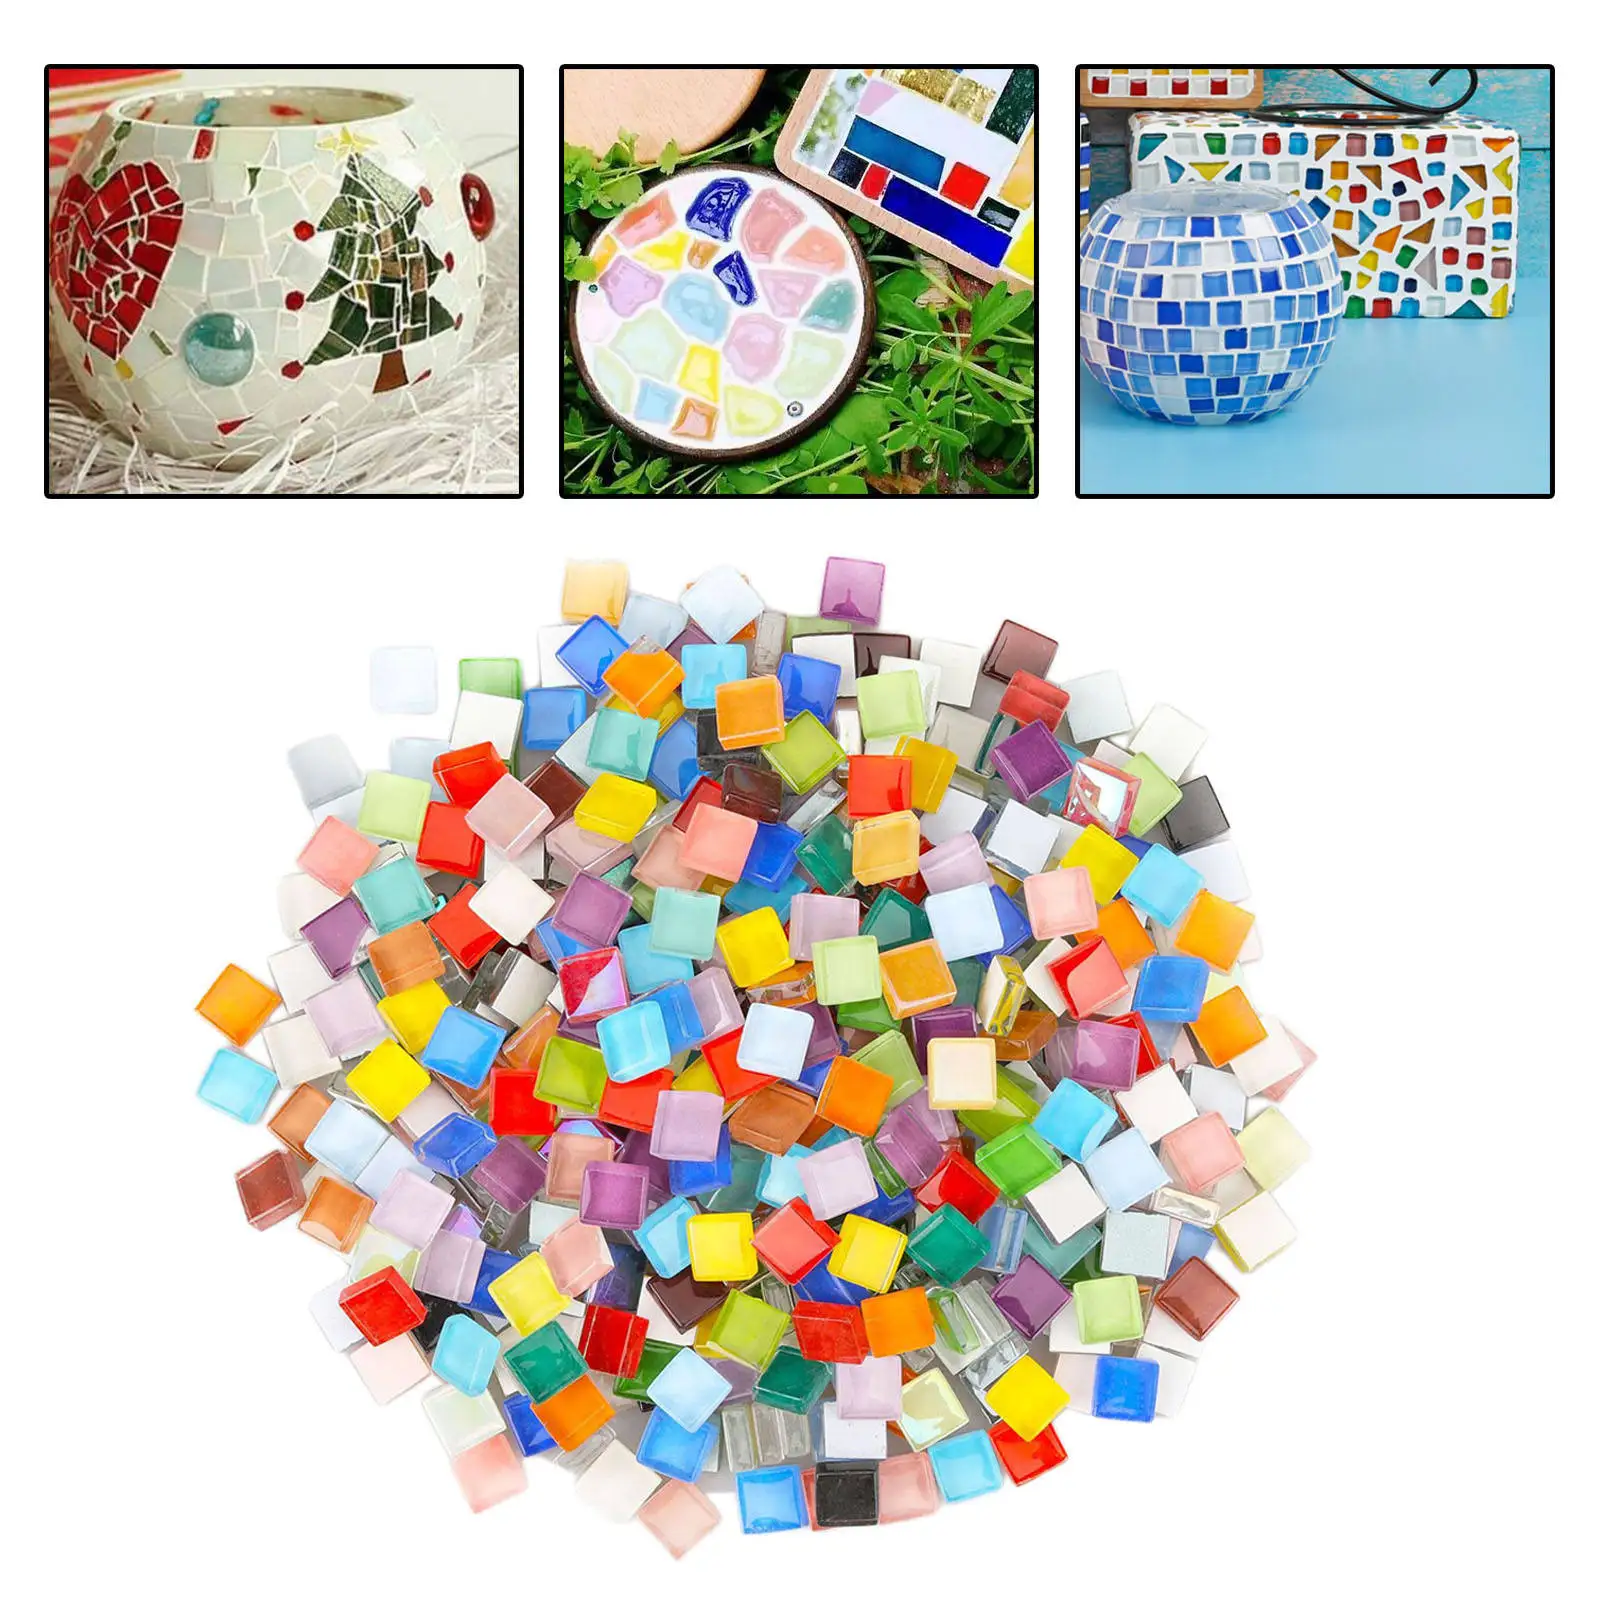 Mini Glass Mosaic Tiles Glitter Mixed Colors Glass Sticker DIY Material for DIY Crafts Hobbies Picture Frames Plates Flowerpots